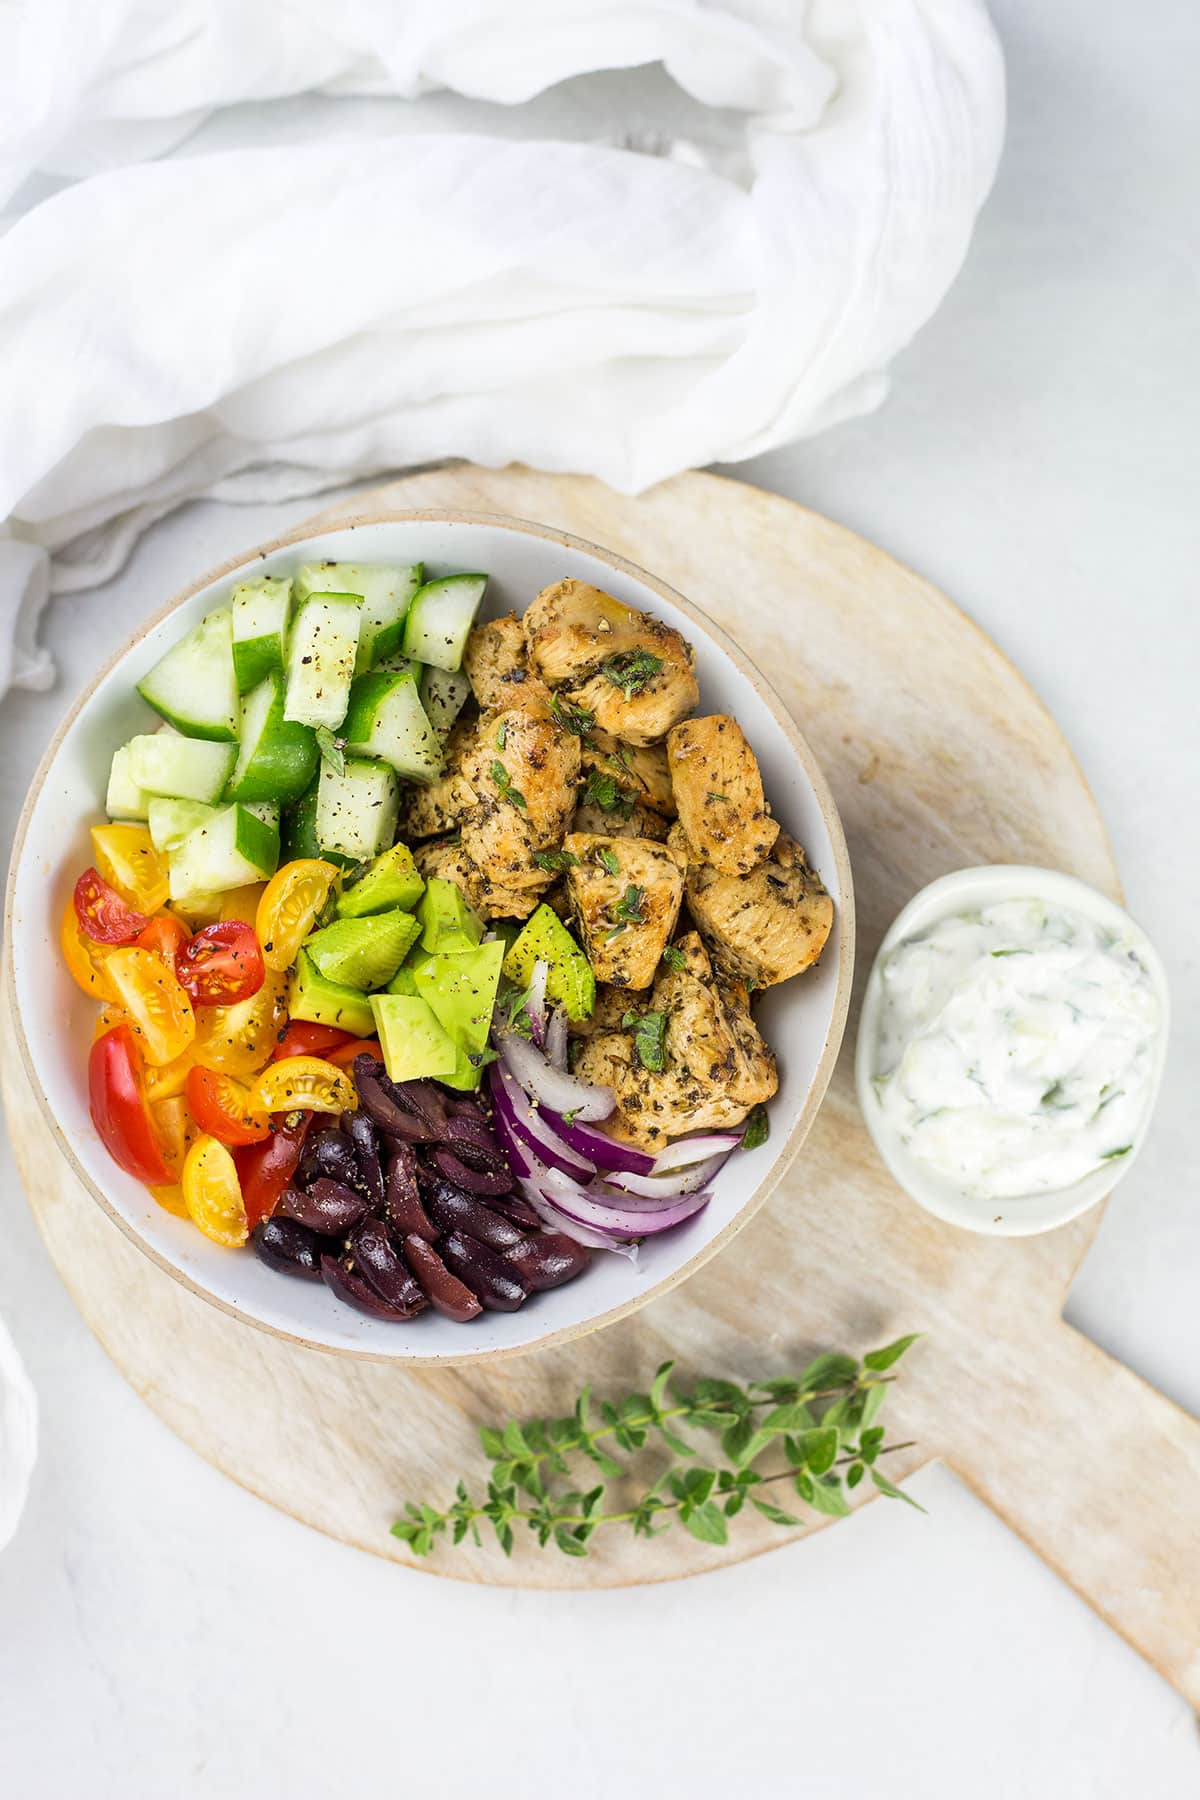 Birdseye view of Greek chicken bowl with tzatziki on wooden board and white cloth in background.